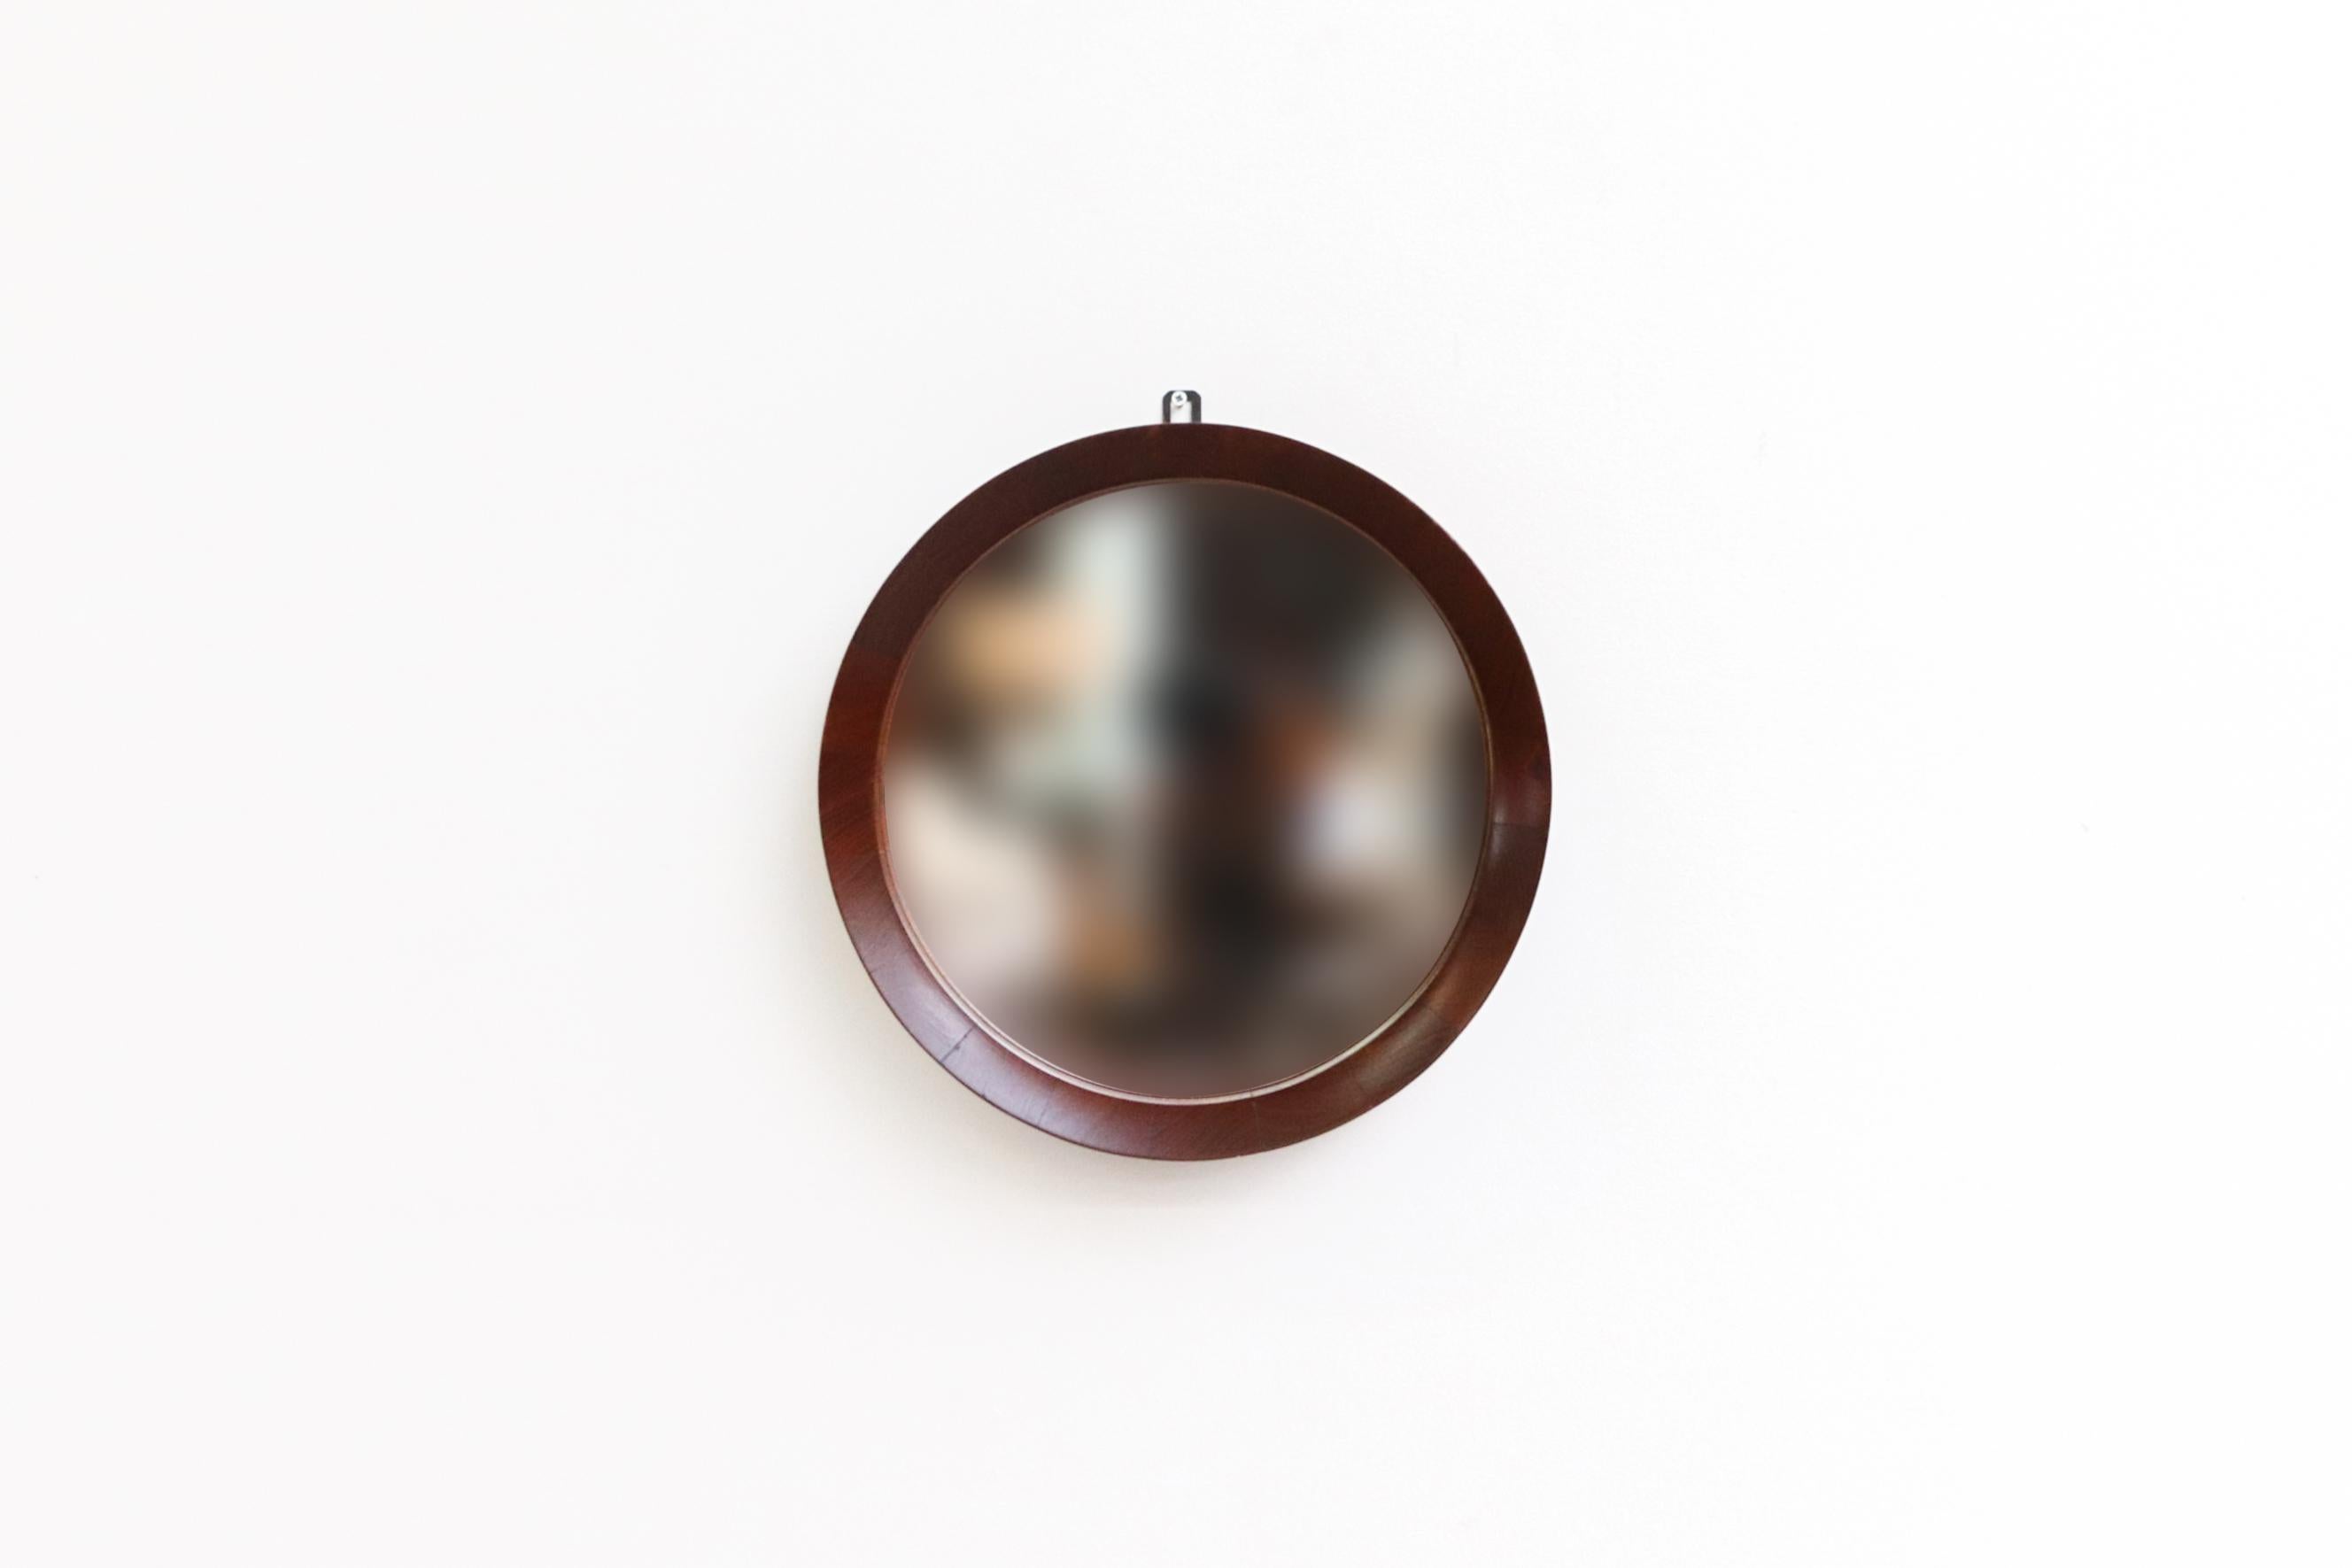 Lovely, Mid-Century, Jacques Adnet inspired round teak wall mirror. Expertly carved teak wood frame with original glass and attached wall mount. In original condition with some light wear consistent with age and use.  